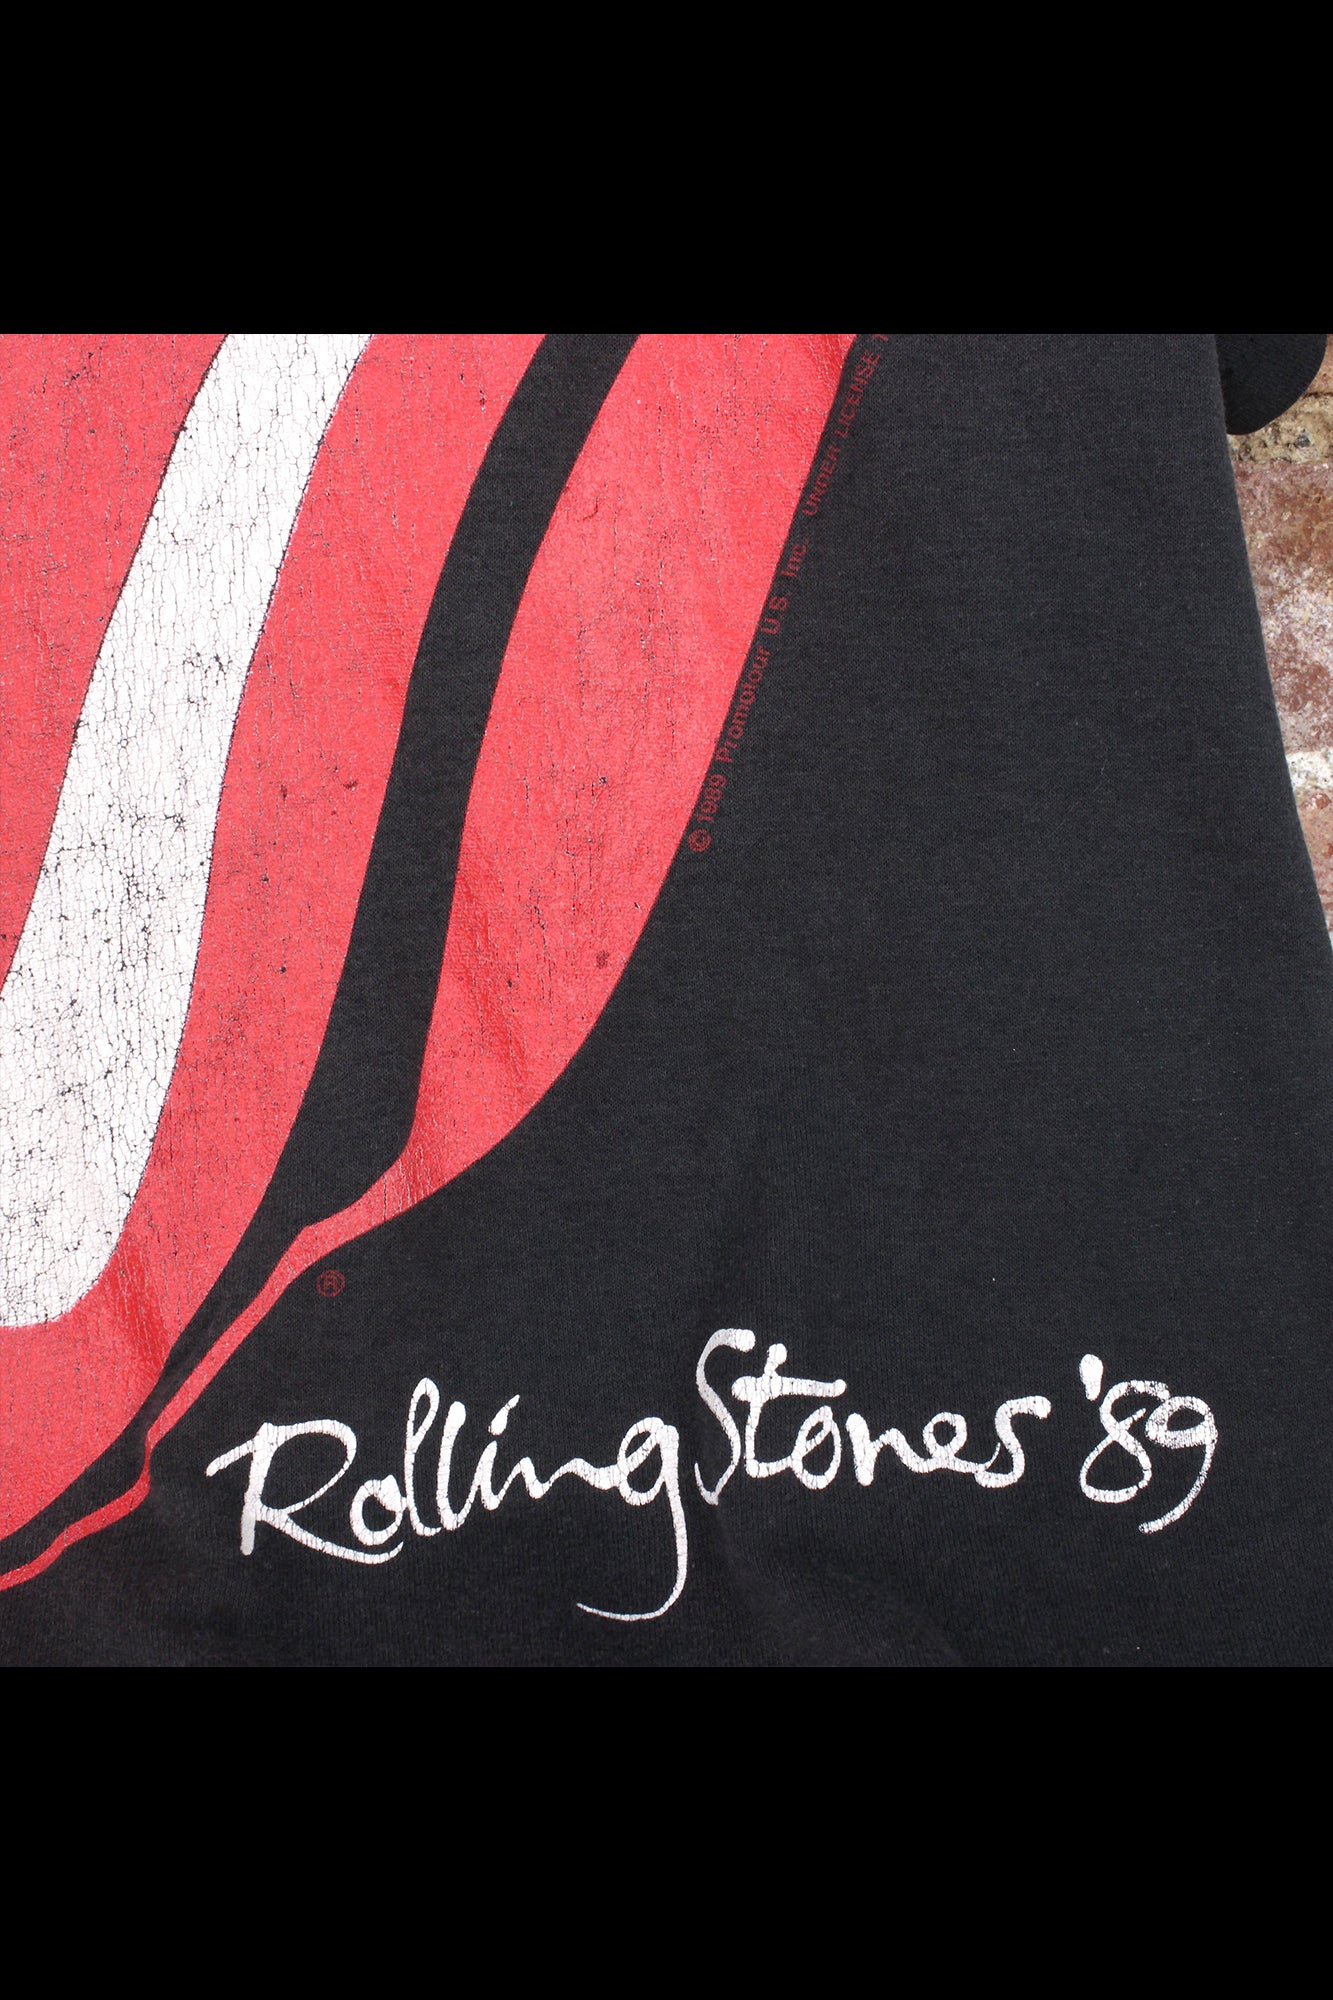 989 "Rolling Stones" Tee - Small